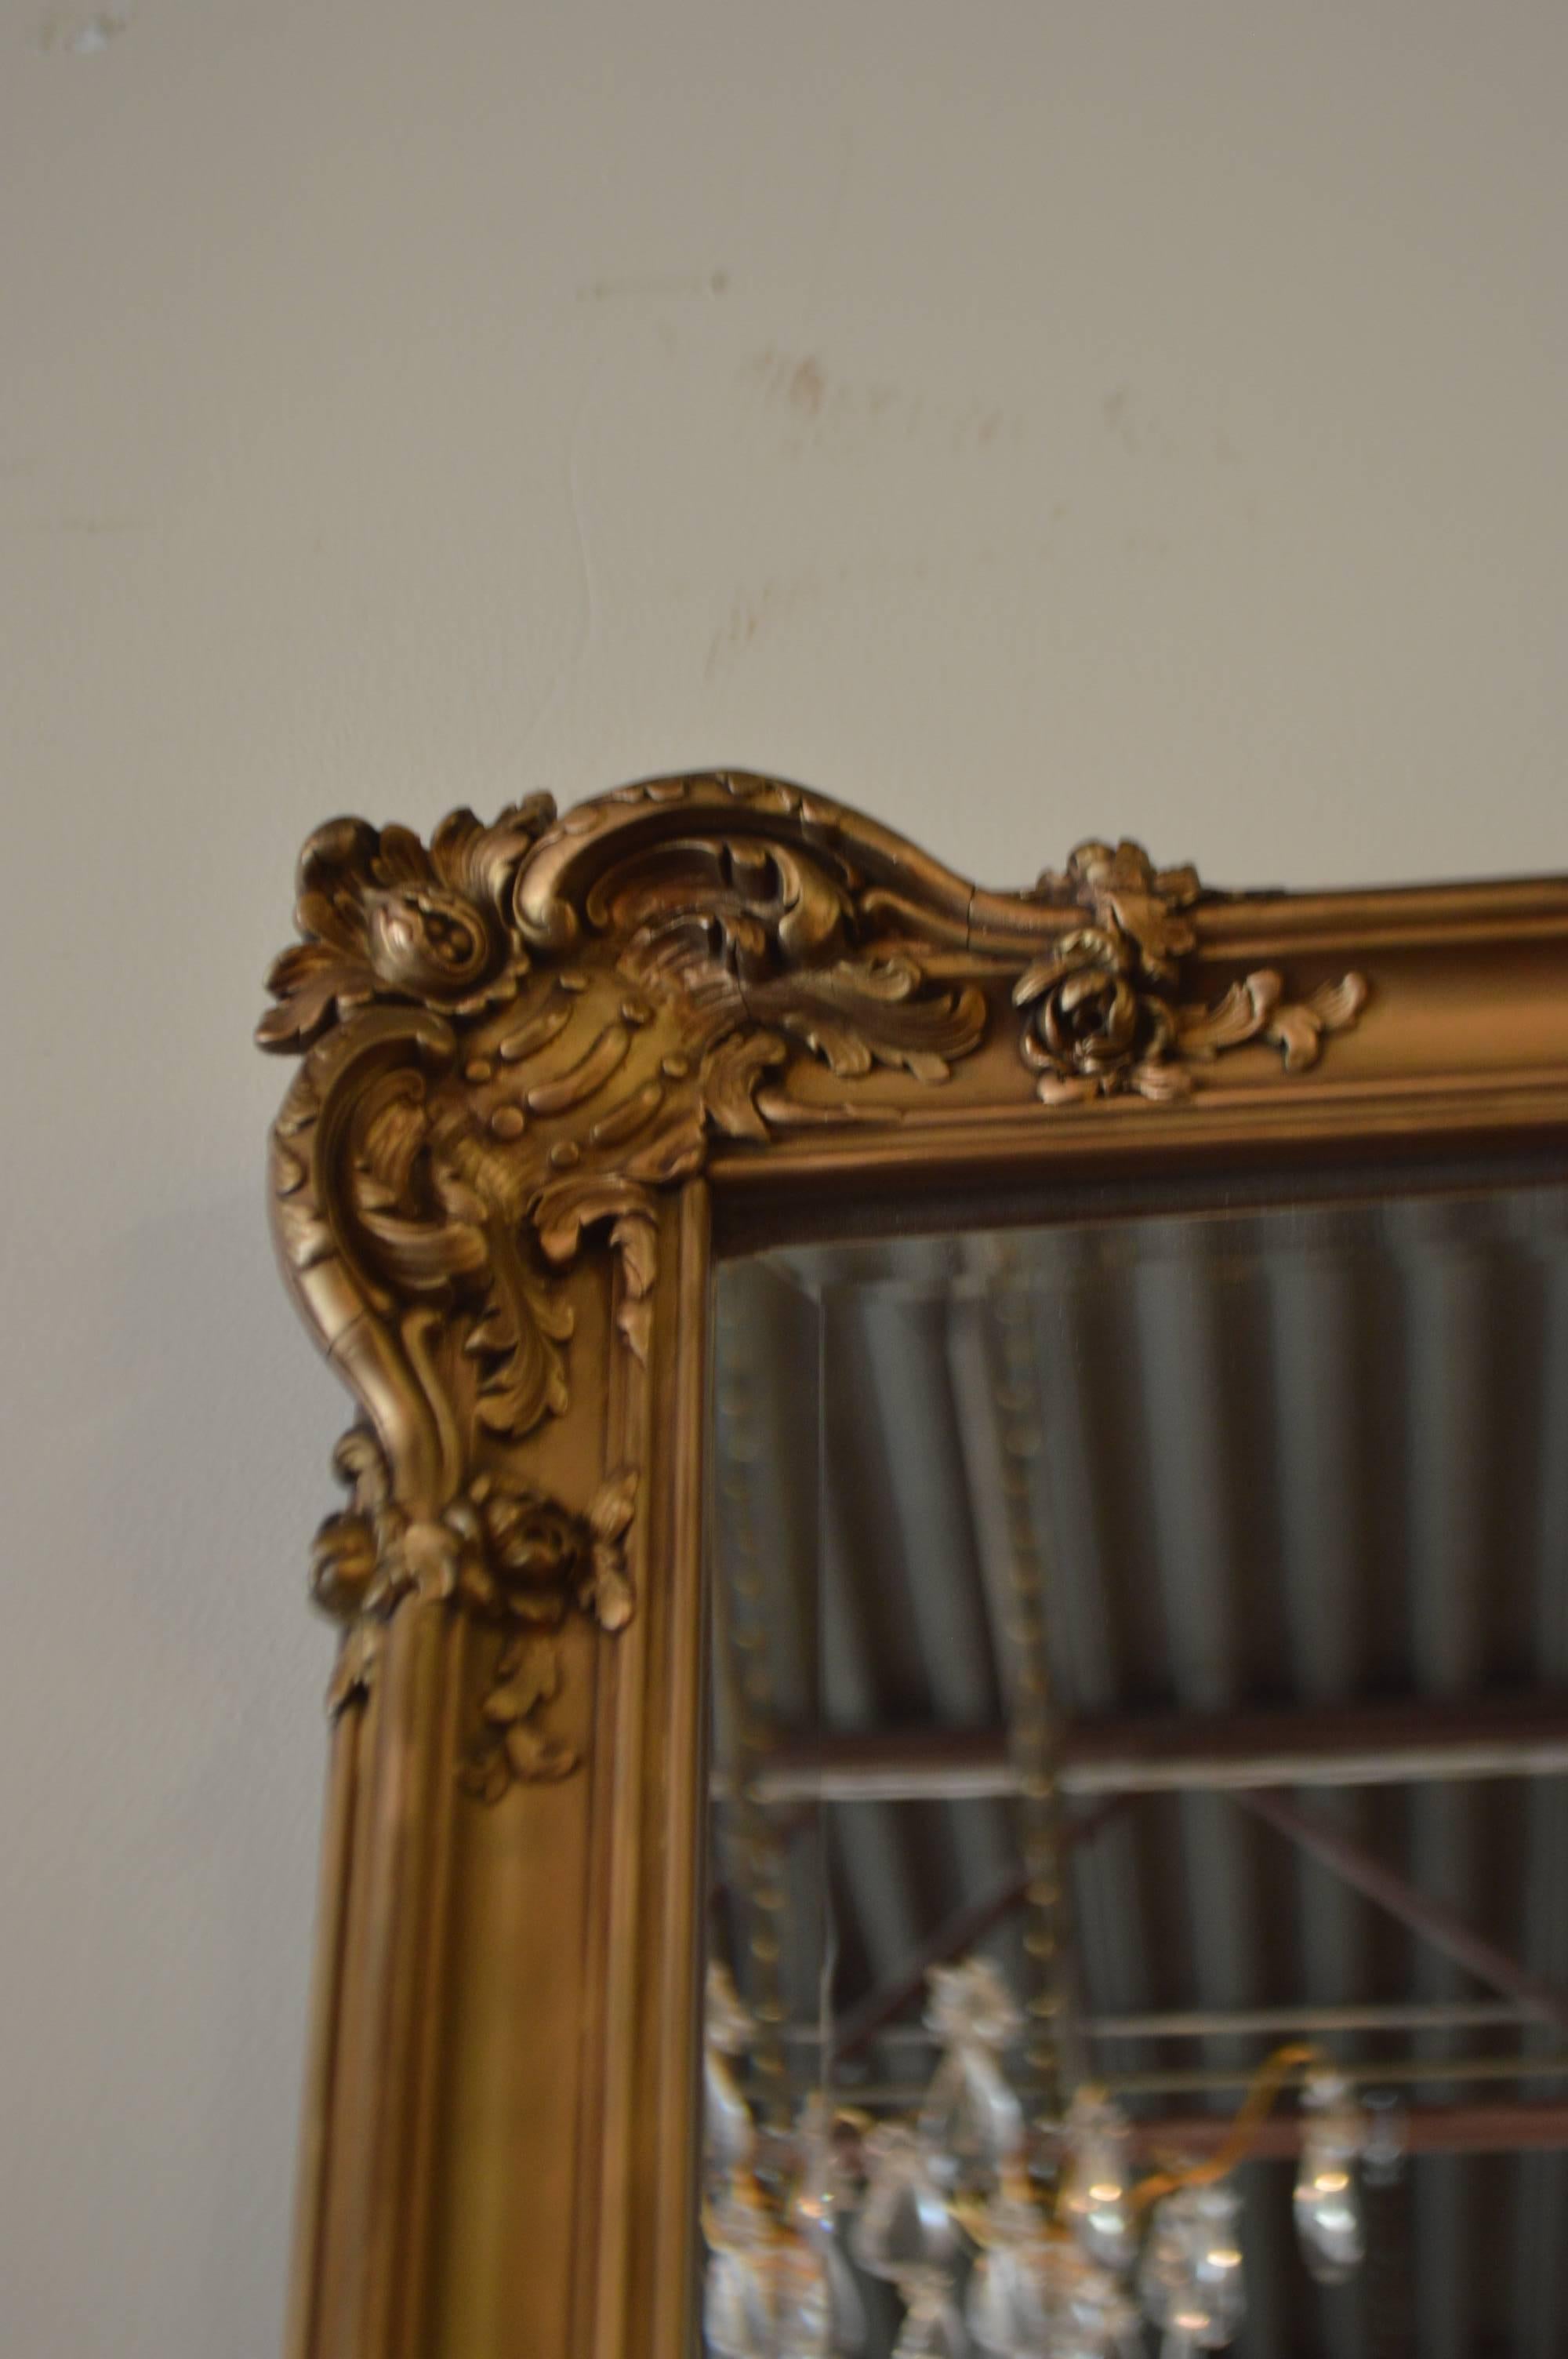 Louis XV style hand-carved wooden gilded mirror. The hand cared details are typical of the Louis XV showing shells, acanthus leaves and flowers all displayed in harmony on the four corners and at the top of the mirror.
The beveled mirror is new.